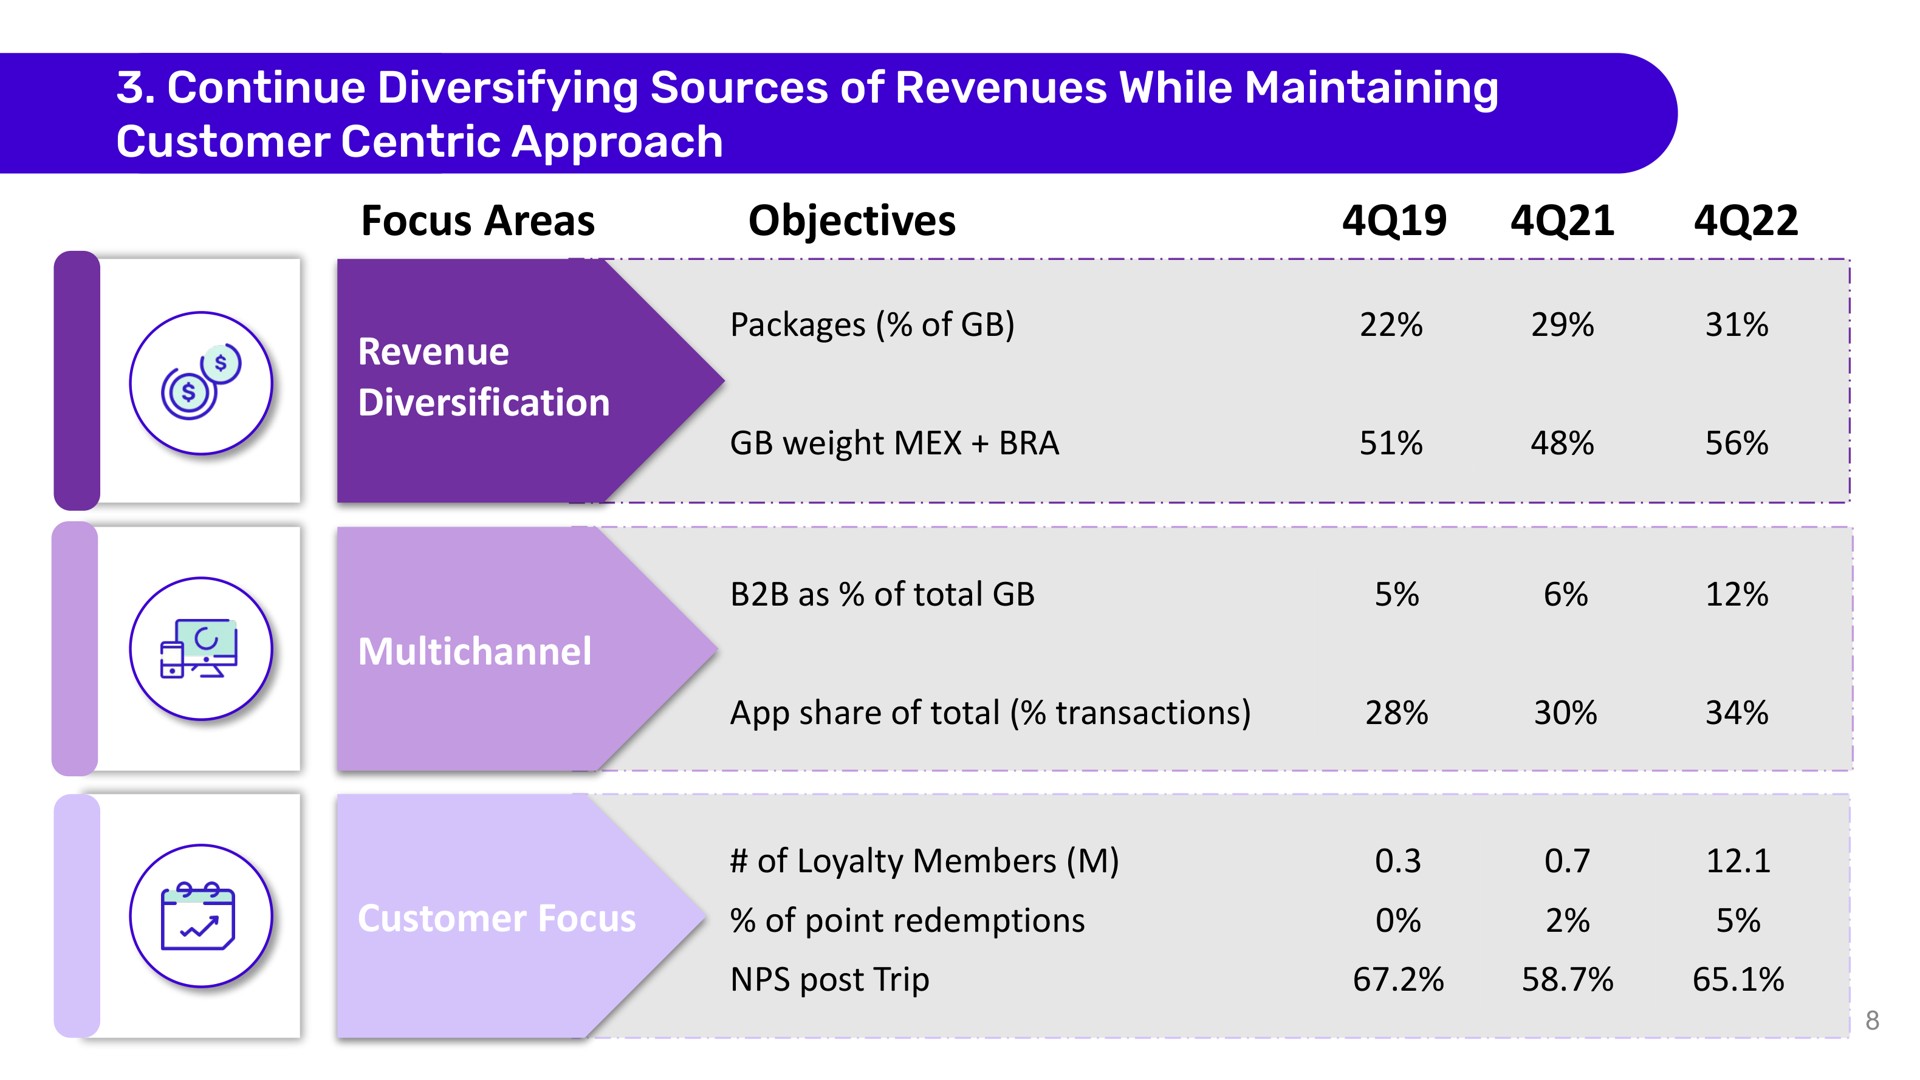 continue diversifying sources of revenues while maintaining customer centric approach focus areas objectives revenue diversification customer focus | Despegar